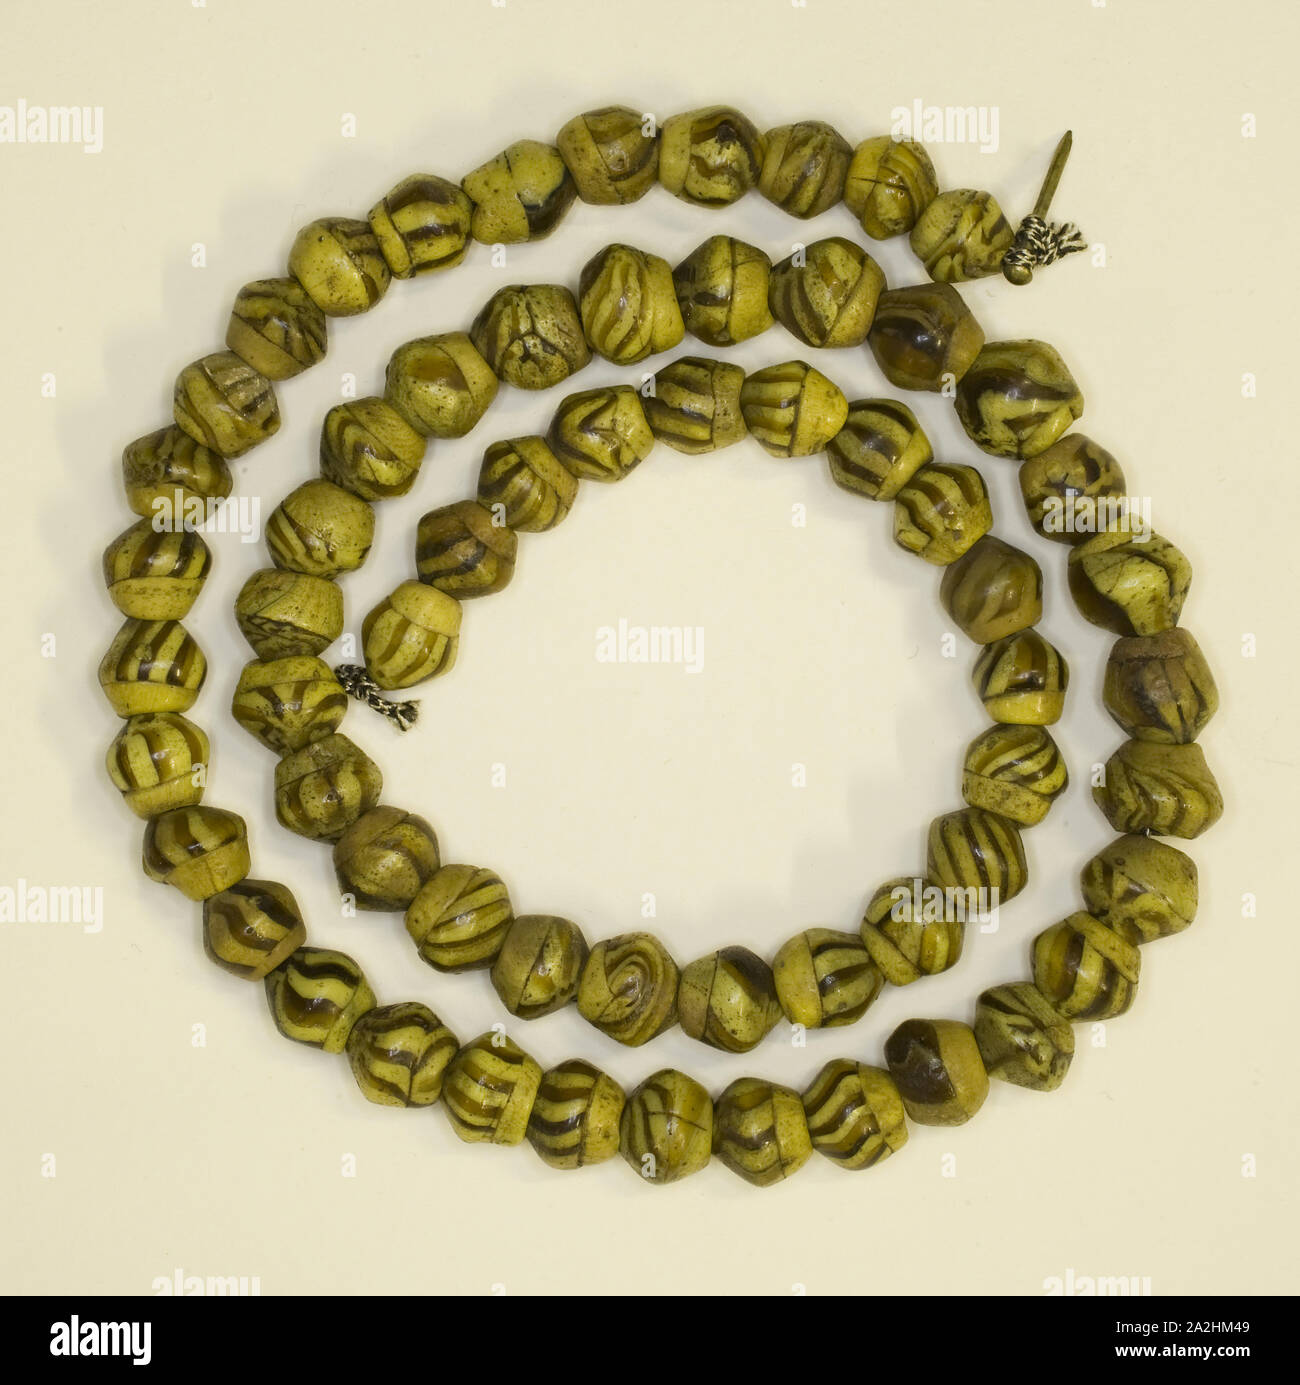 String of Beads, 4th/5th century AD, Roman or Byzantine, Egypt, Egypt, Glass, L. 102.2 cm (40 1/4 in.), average diam. 1.6 cm (5/8 in Stock Photo